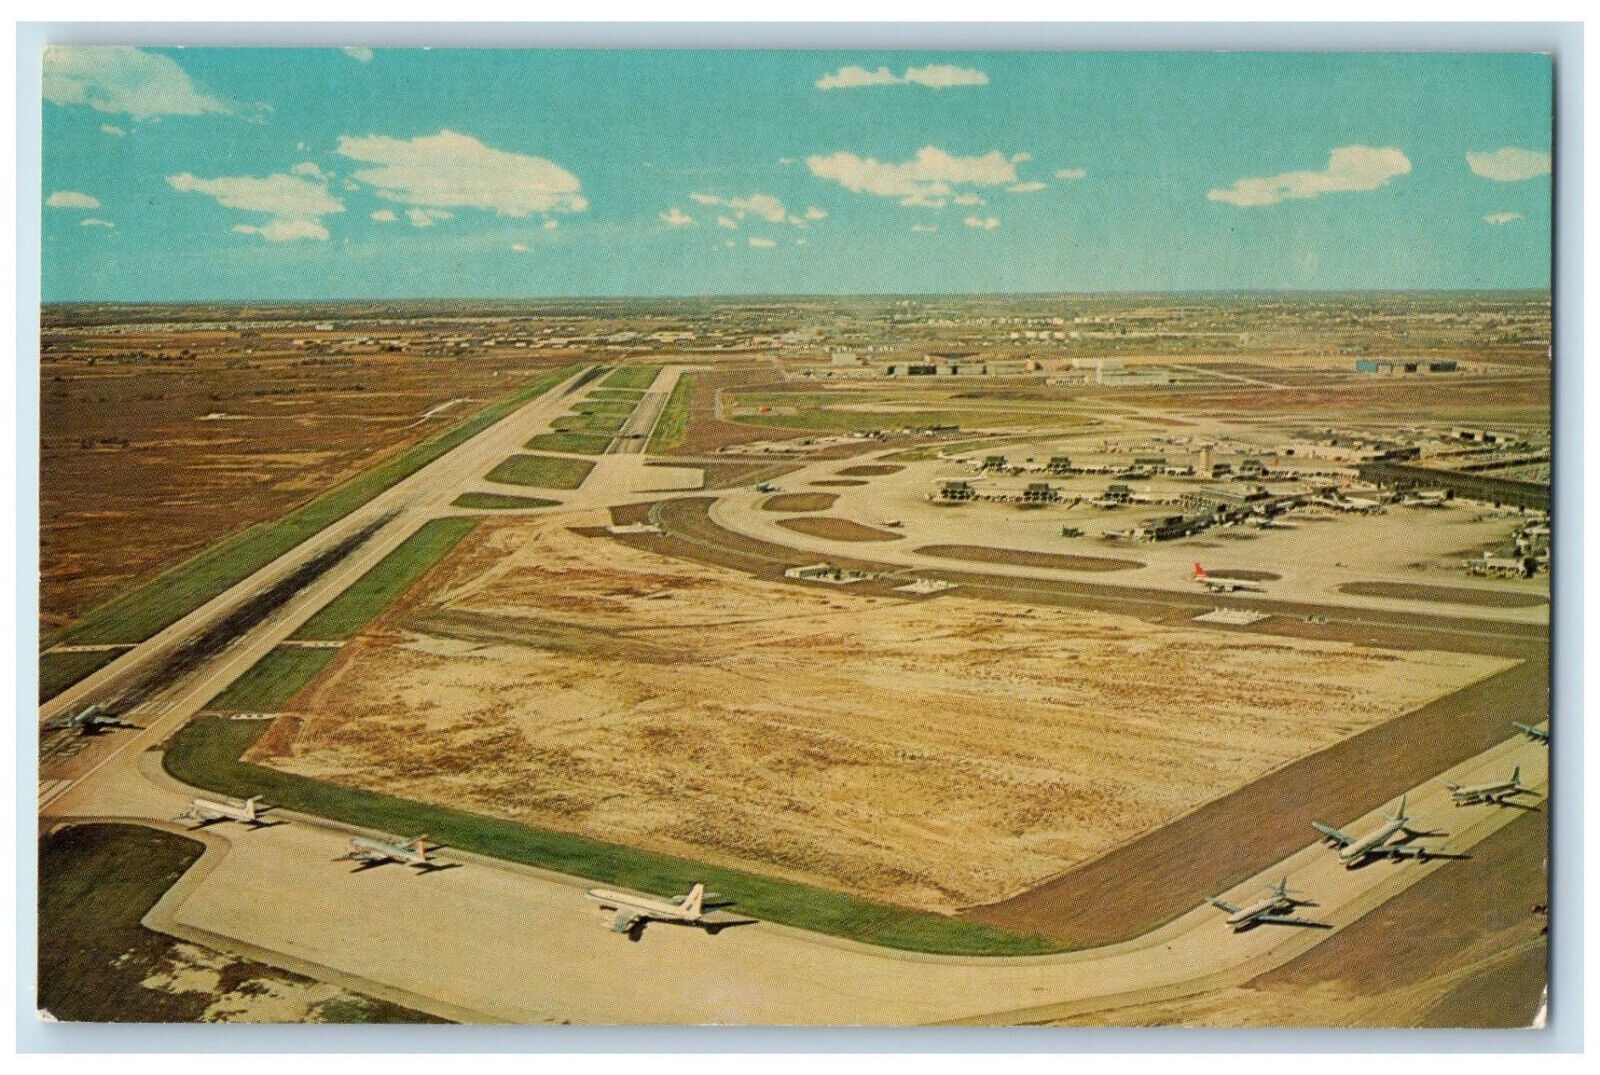 c1960's Airplanes Lined Up Chicago-O'Hare International Airport, IL Postcard